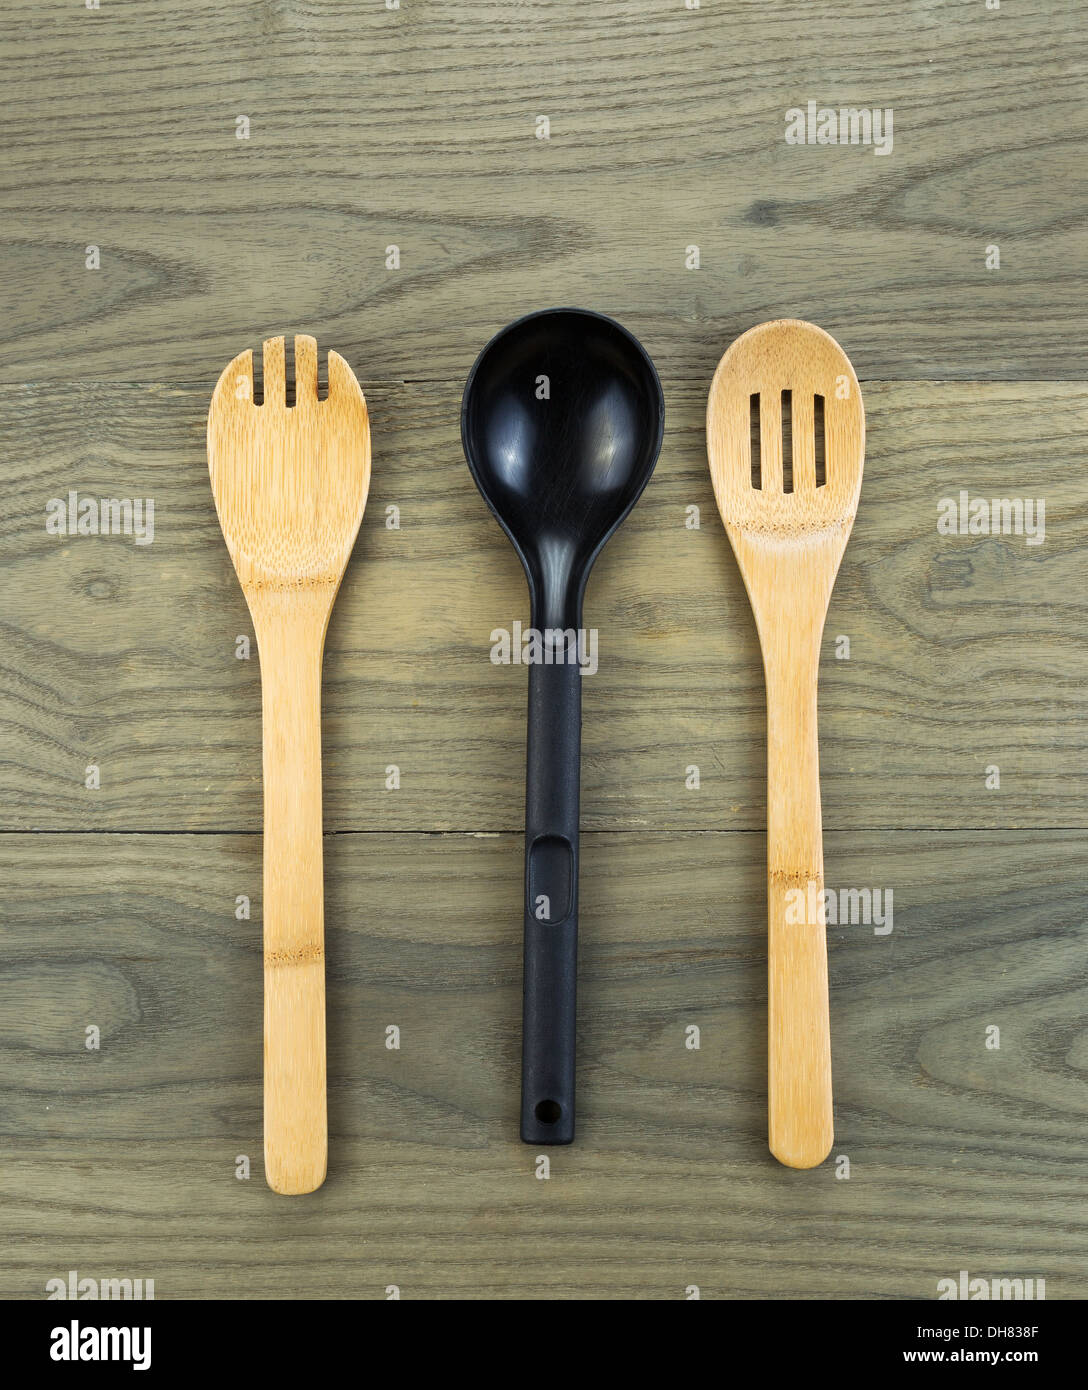 Photo of three kitchen spoons, two of them wooden, on aged white oak boards Stock Photo